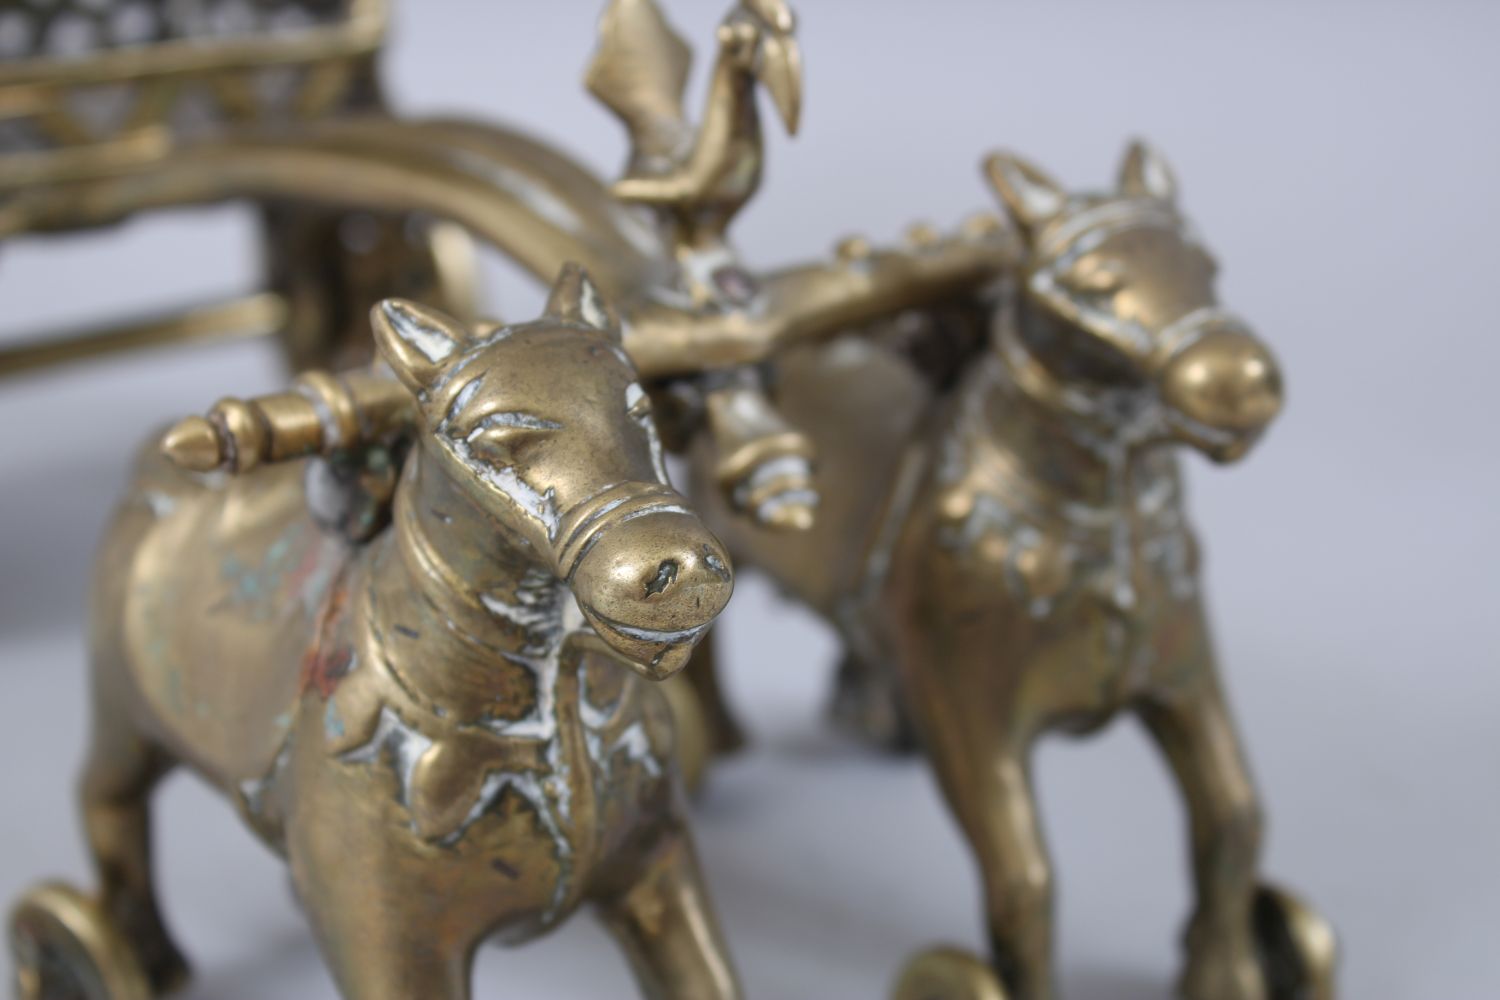 AN 18TH-19TH CENTURY INDIAN BRASS CHILDS TOY CHARIOT being pulled by two horses, 27cm long. - Image 4 of 4